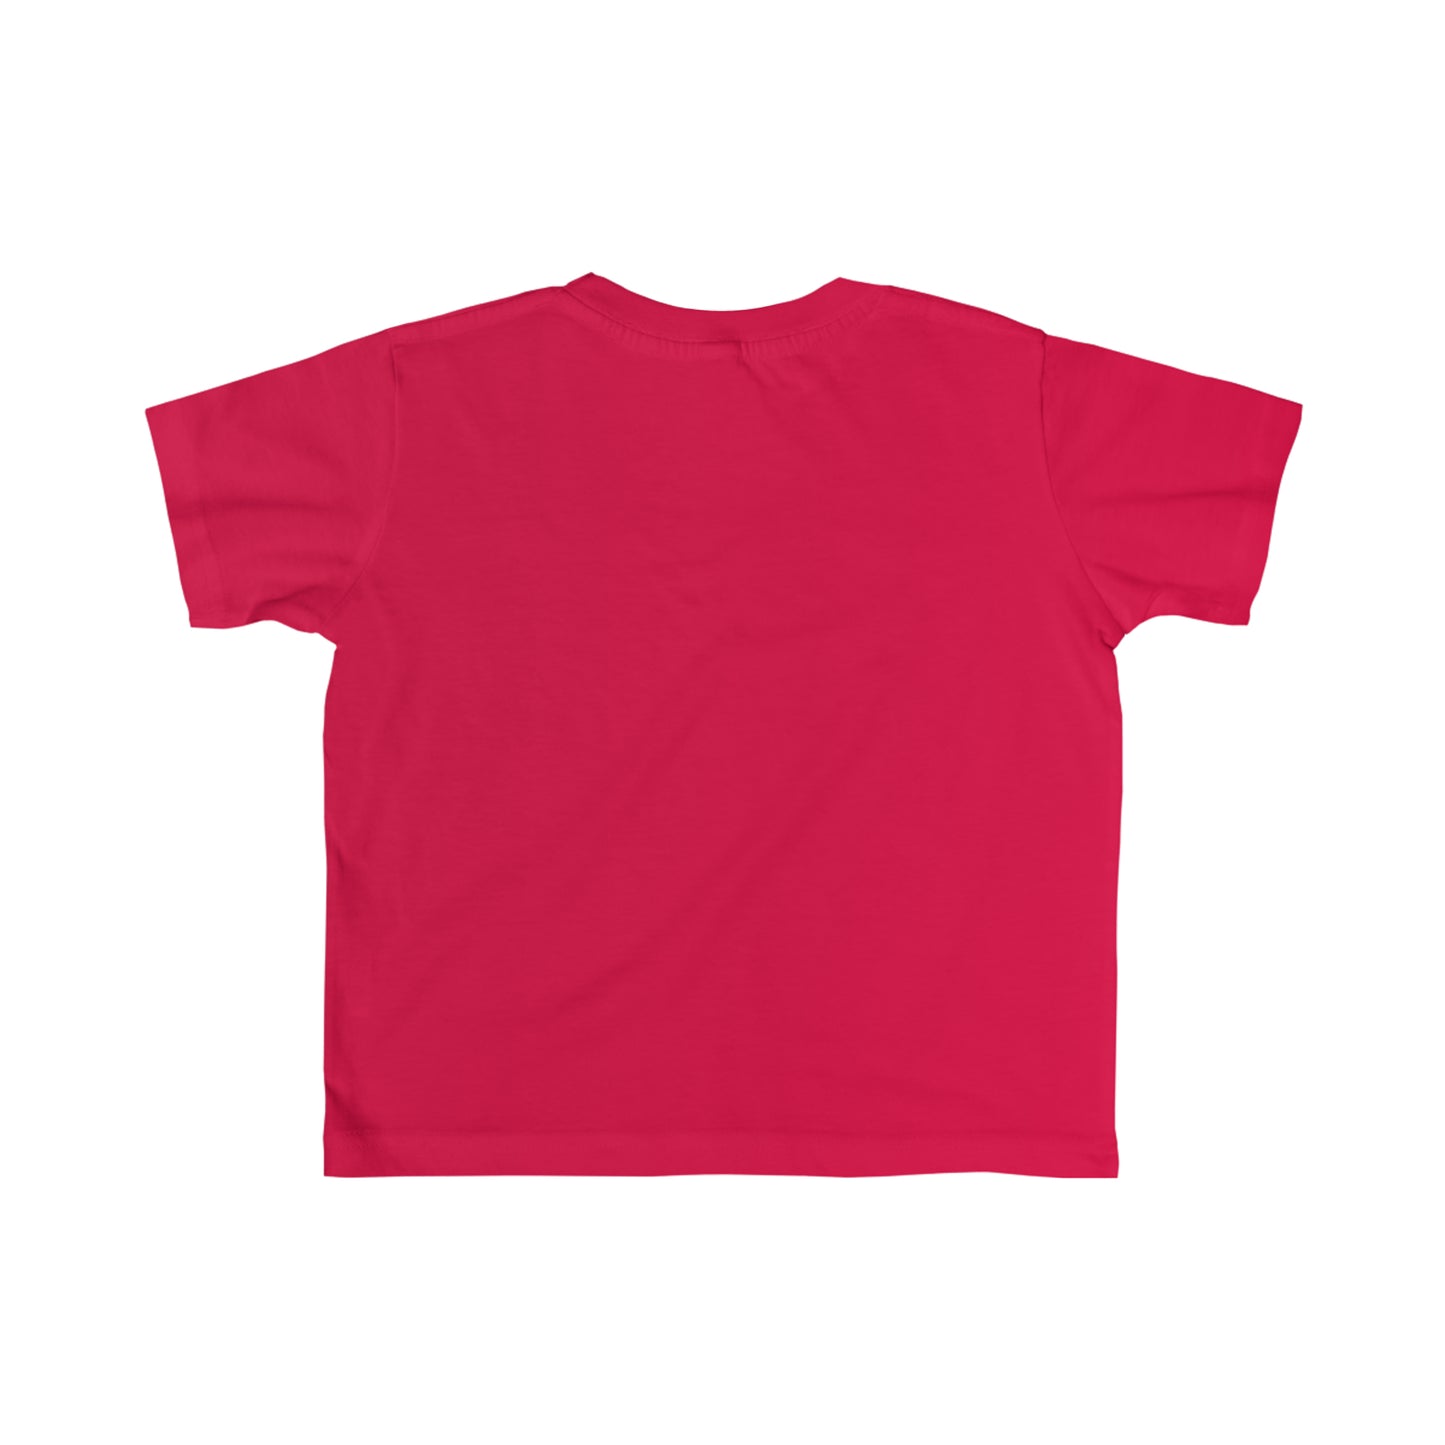 Sweet Tees Collection- Be The Change Toddler's Fine Jersey Tee